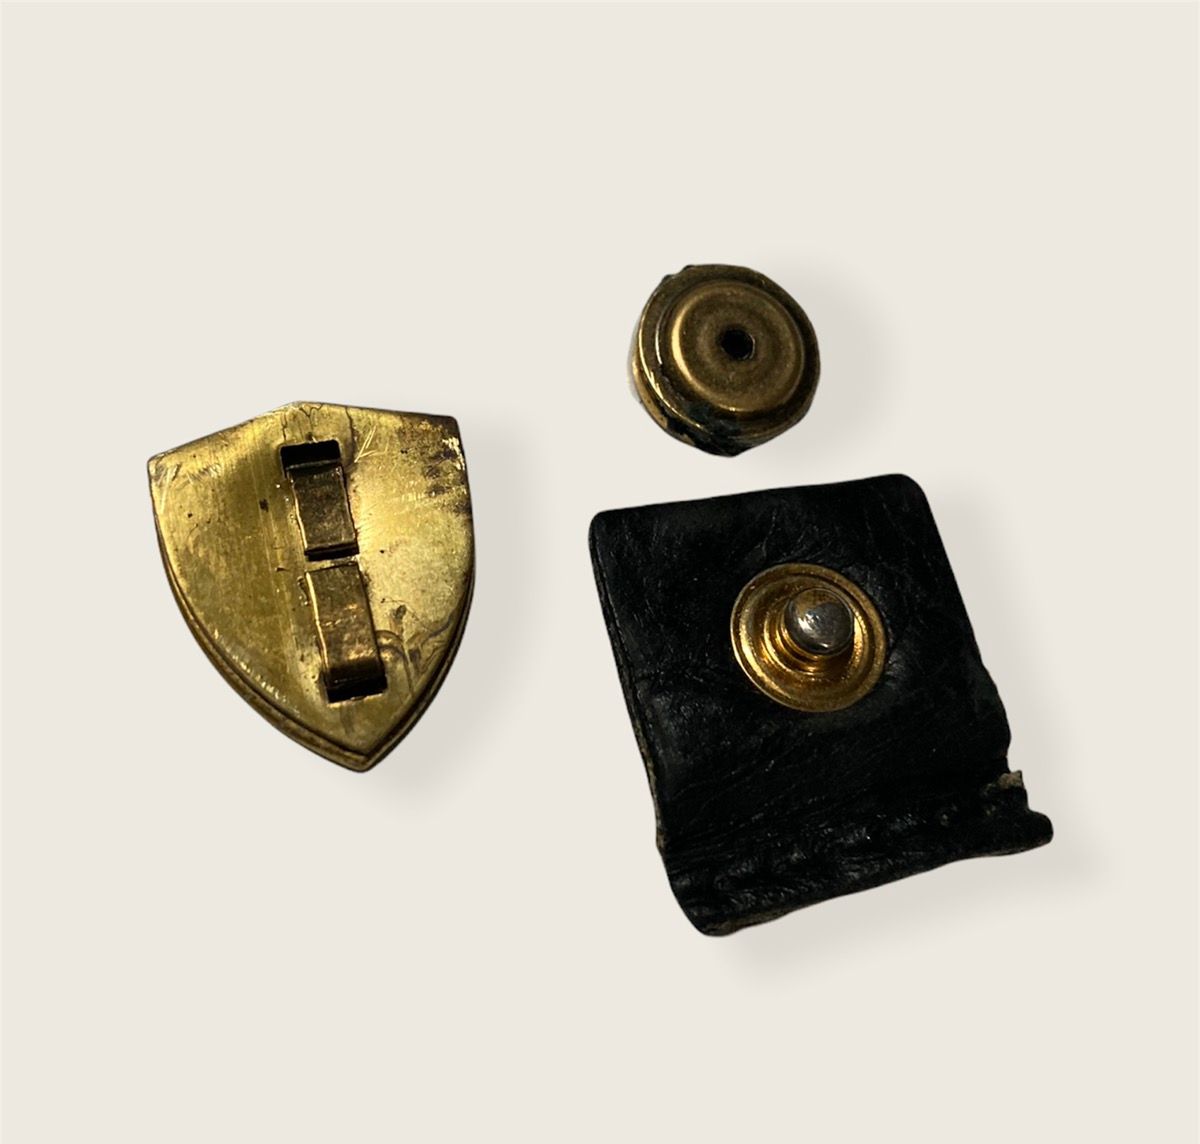 Gucci Crest Pin Emblem and Button Accessories - 4